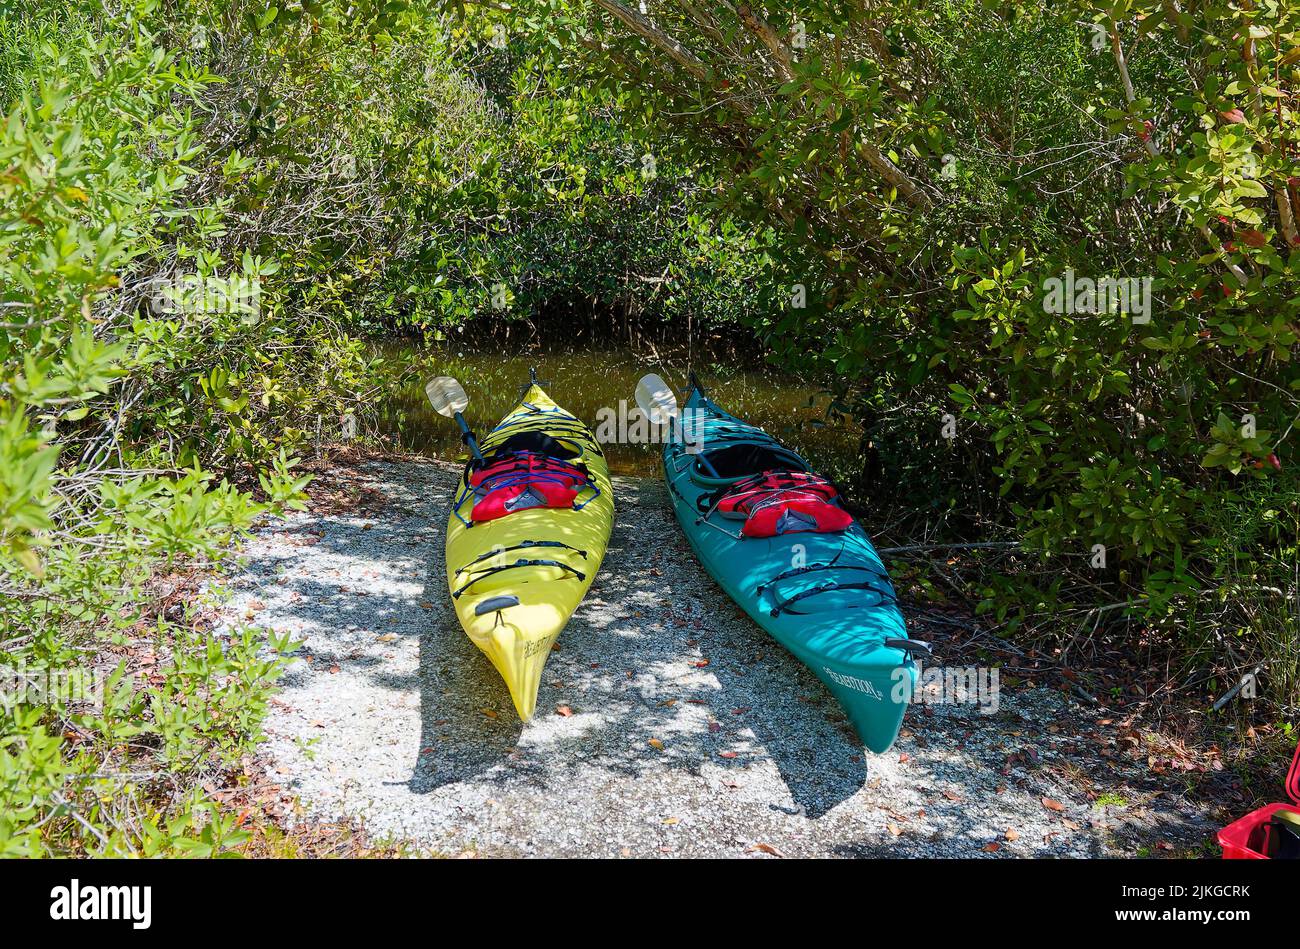 2 kayaks ready to be launched, very small creek, heavy vegetation, yellow, aqua, paddles, PFDs, recreation, fun, sport exercise, Florida, Venice, FL, Stock Photo